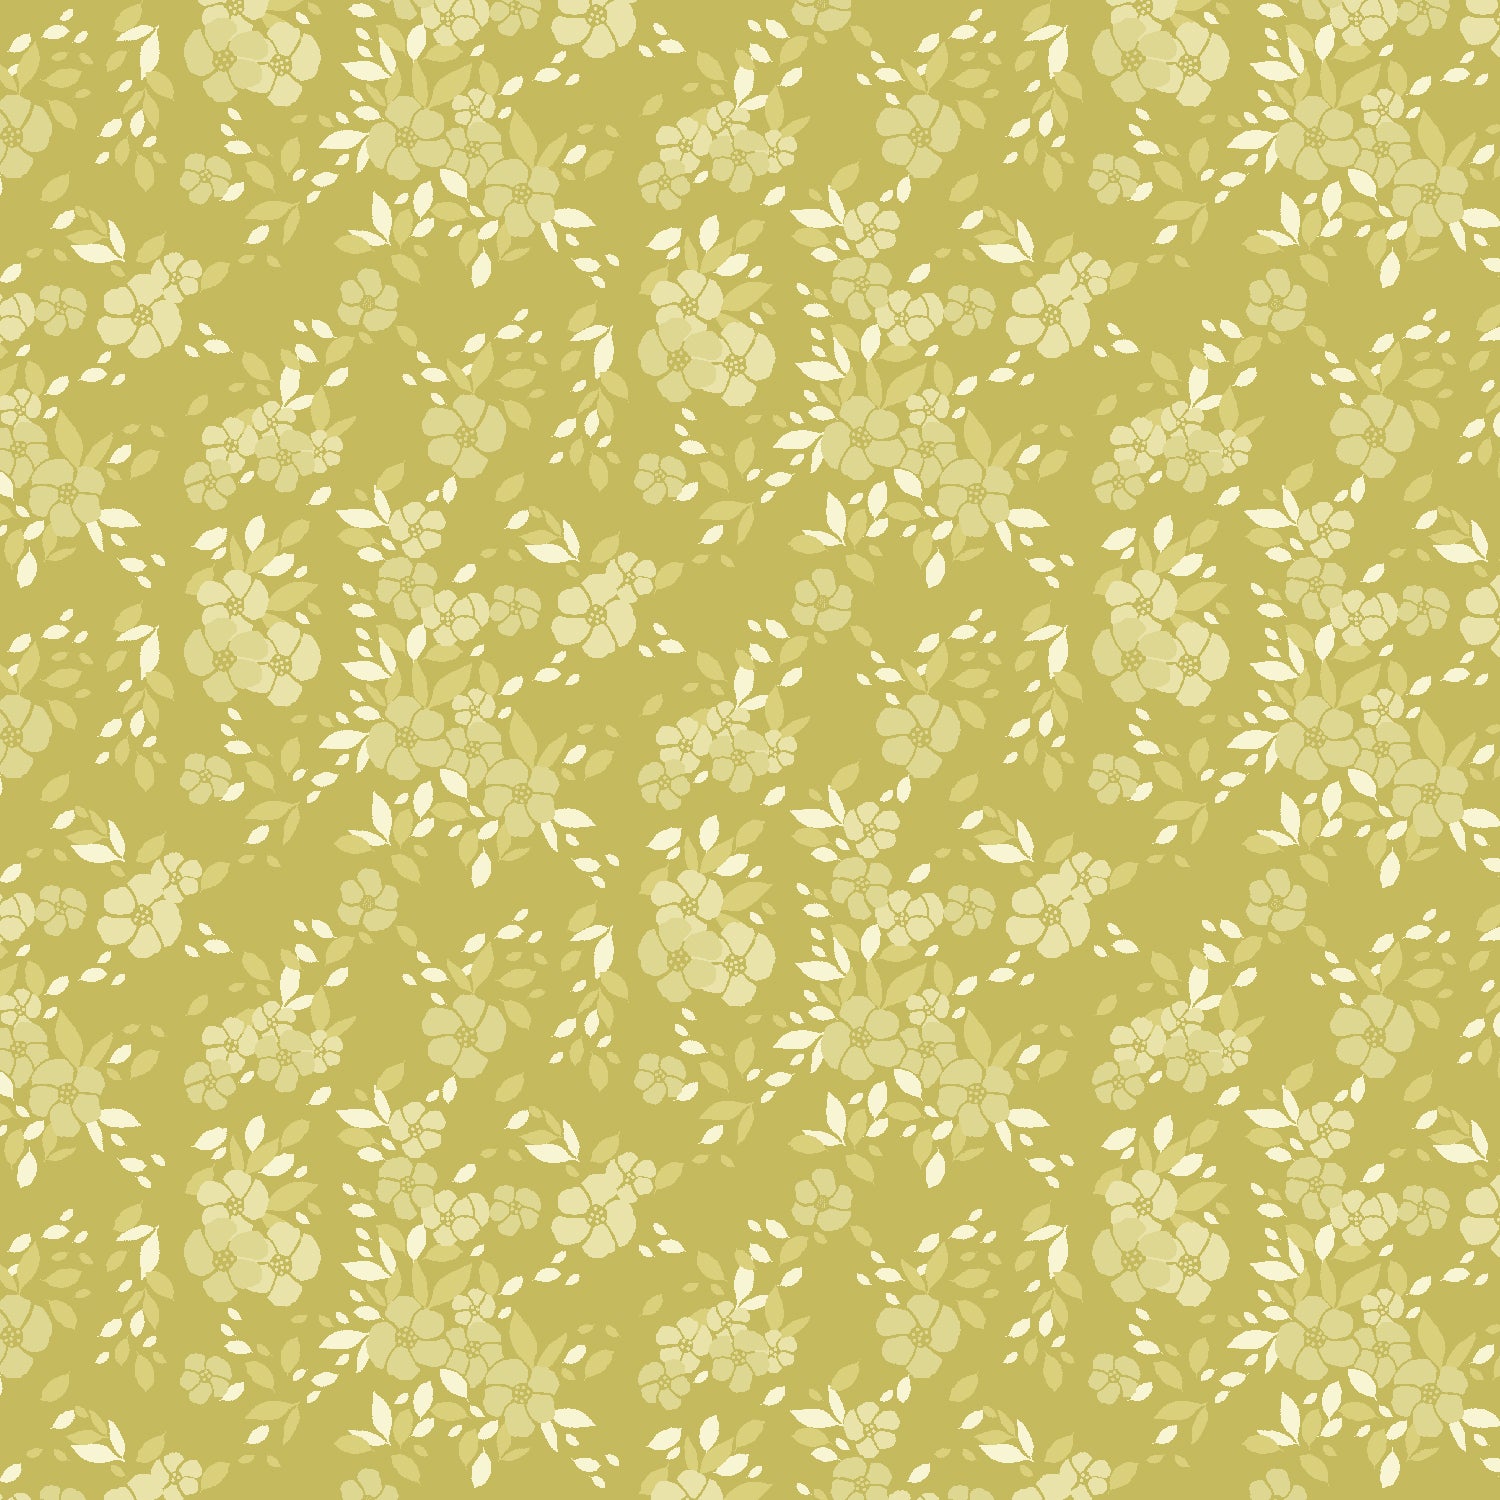 Moonlight Garden Quilt Fabric - Poesie Perfume Tonal Floral in Chartreuse Green - RJ5504-CH2